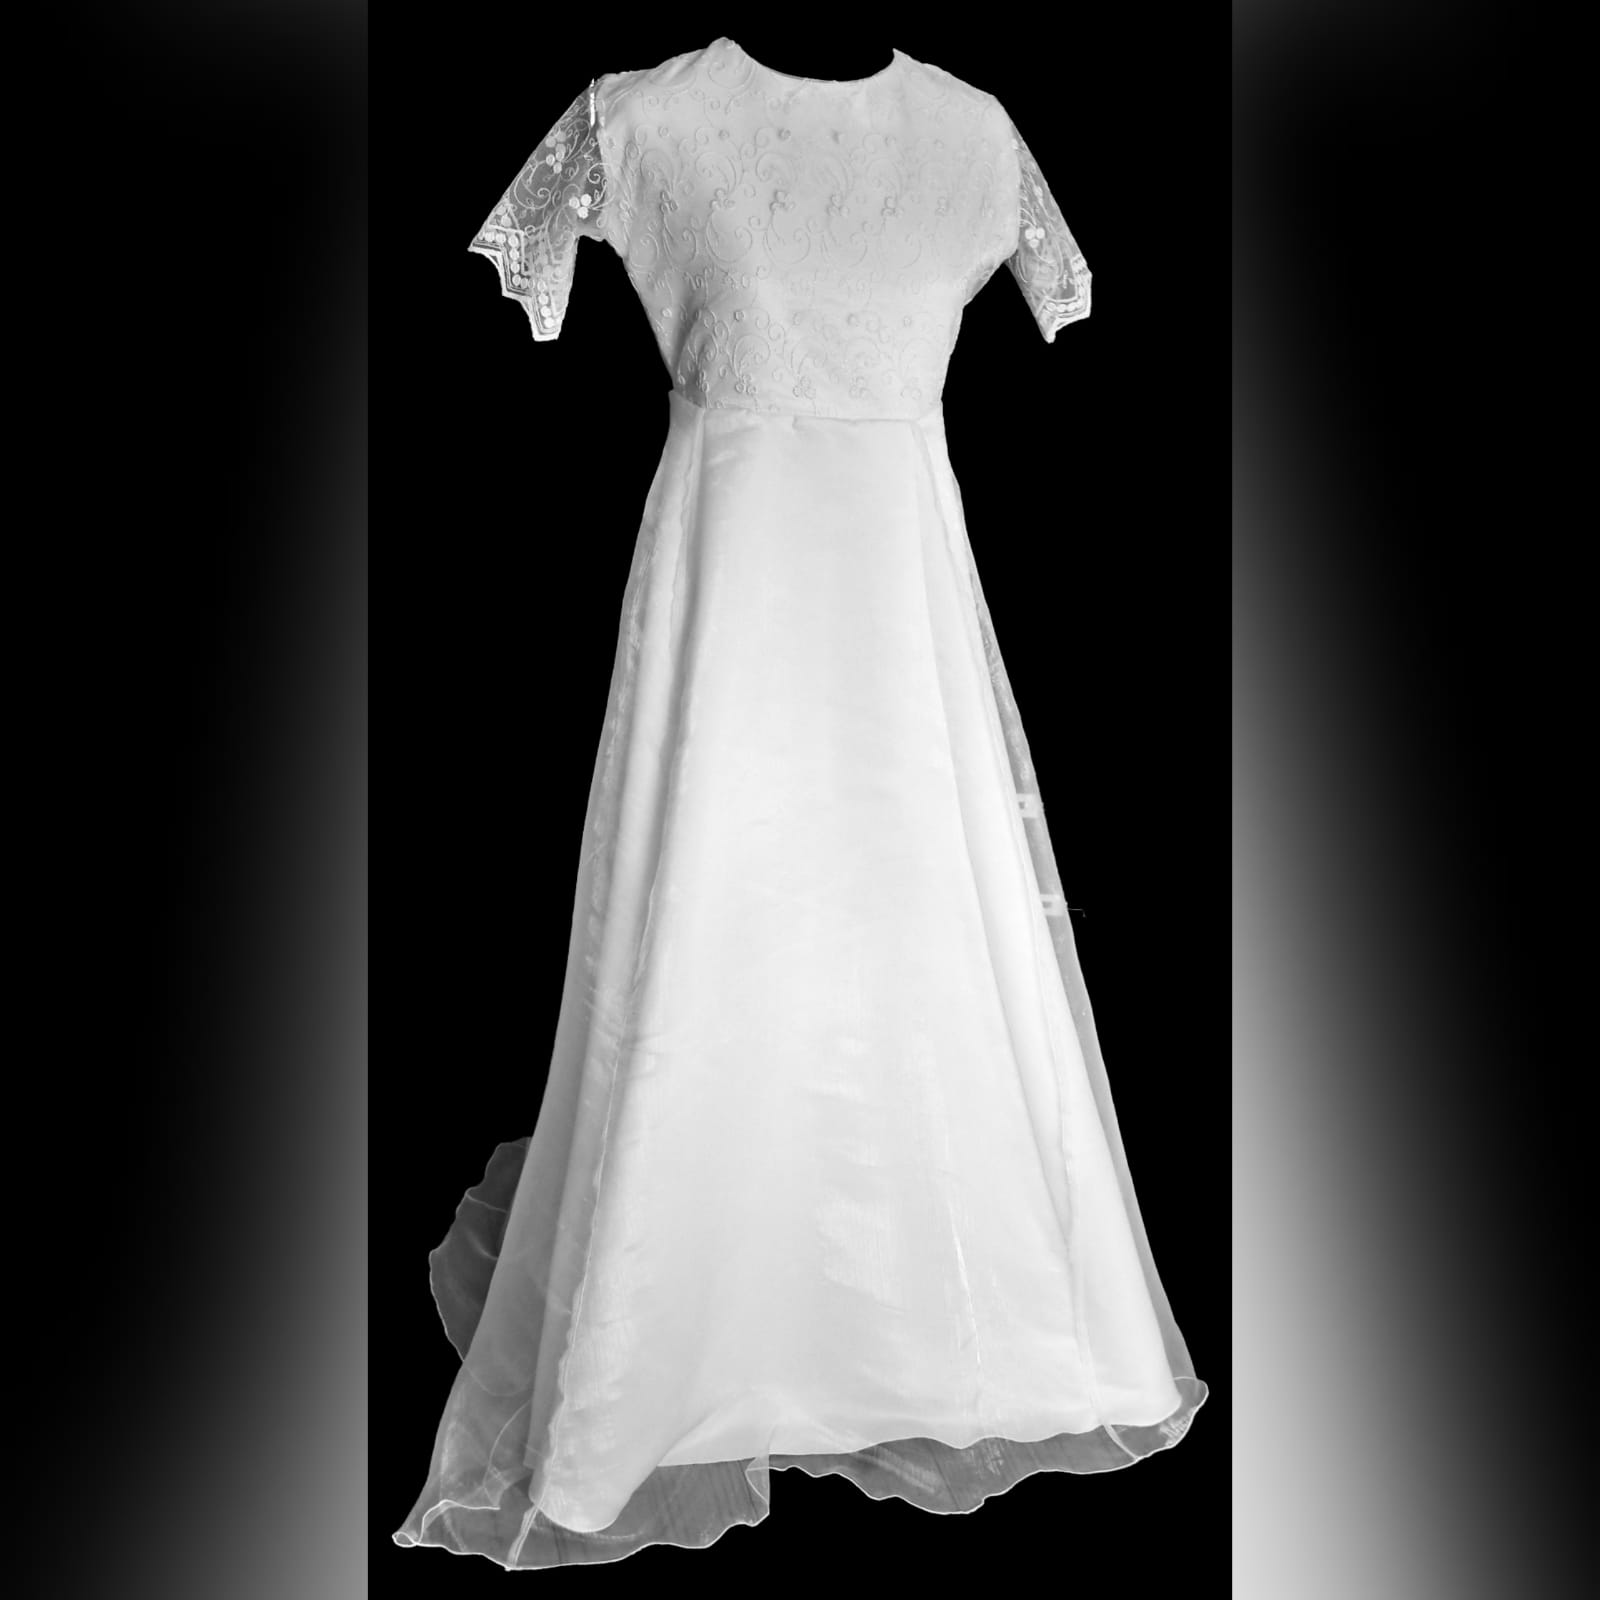 Glitter lace confirmation dress 3 white holy communion dress with a lace glitter bodice and scalloped short sleeves.